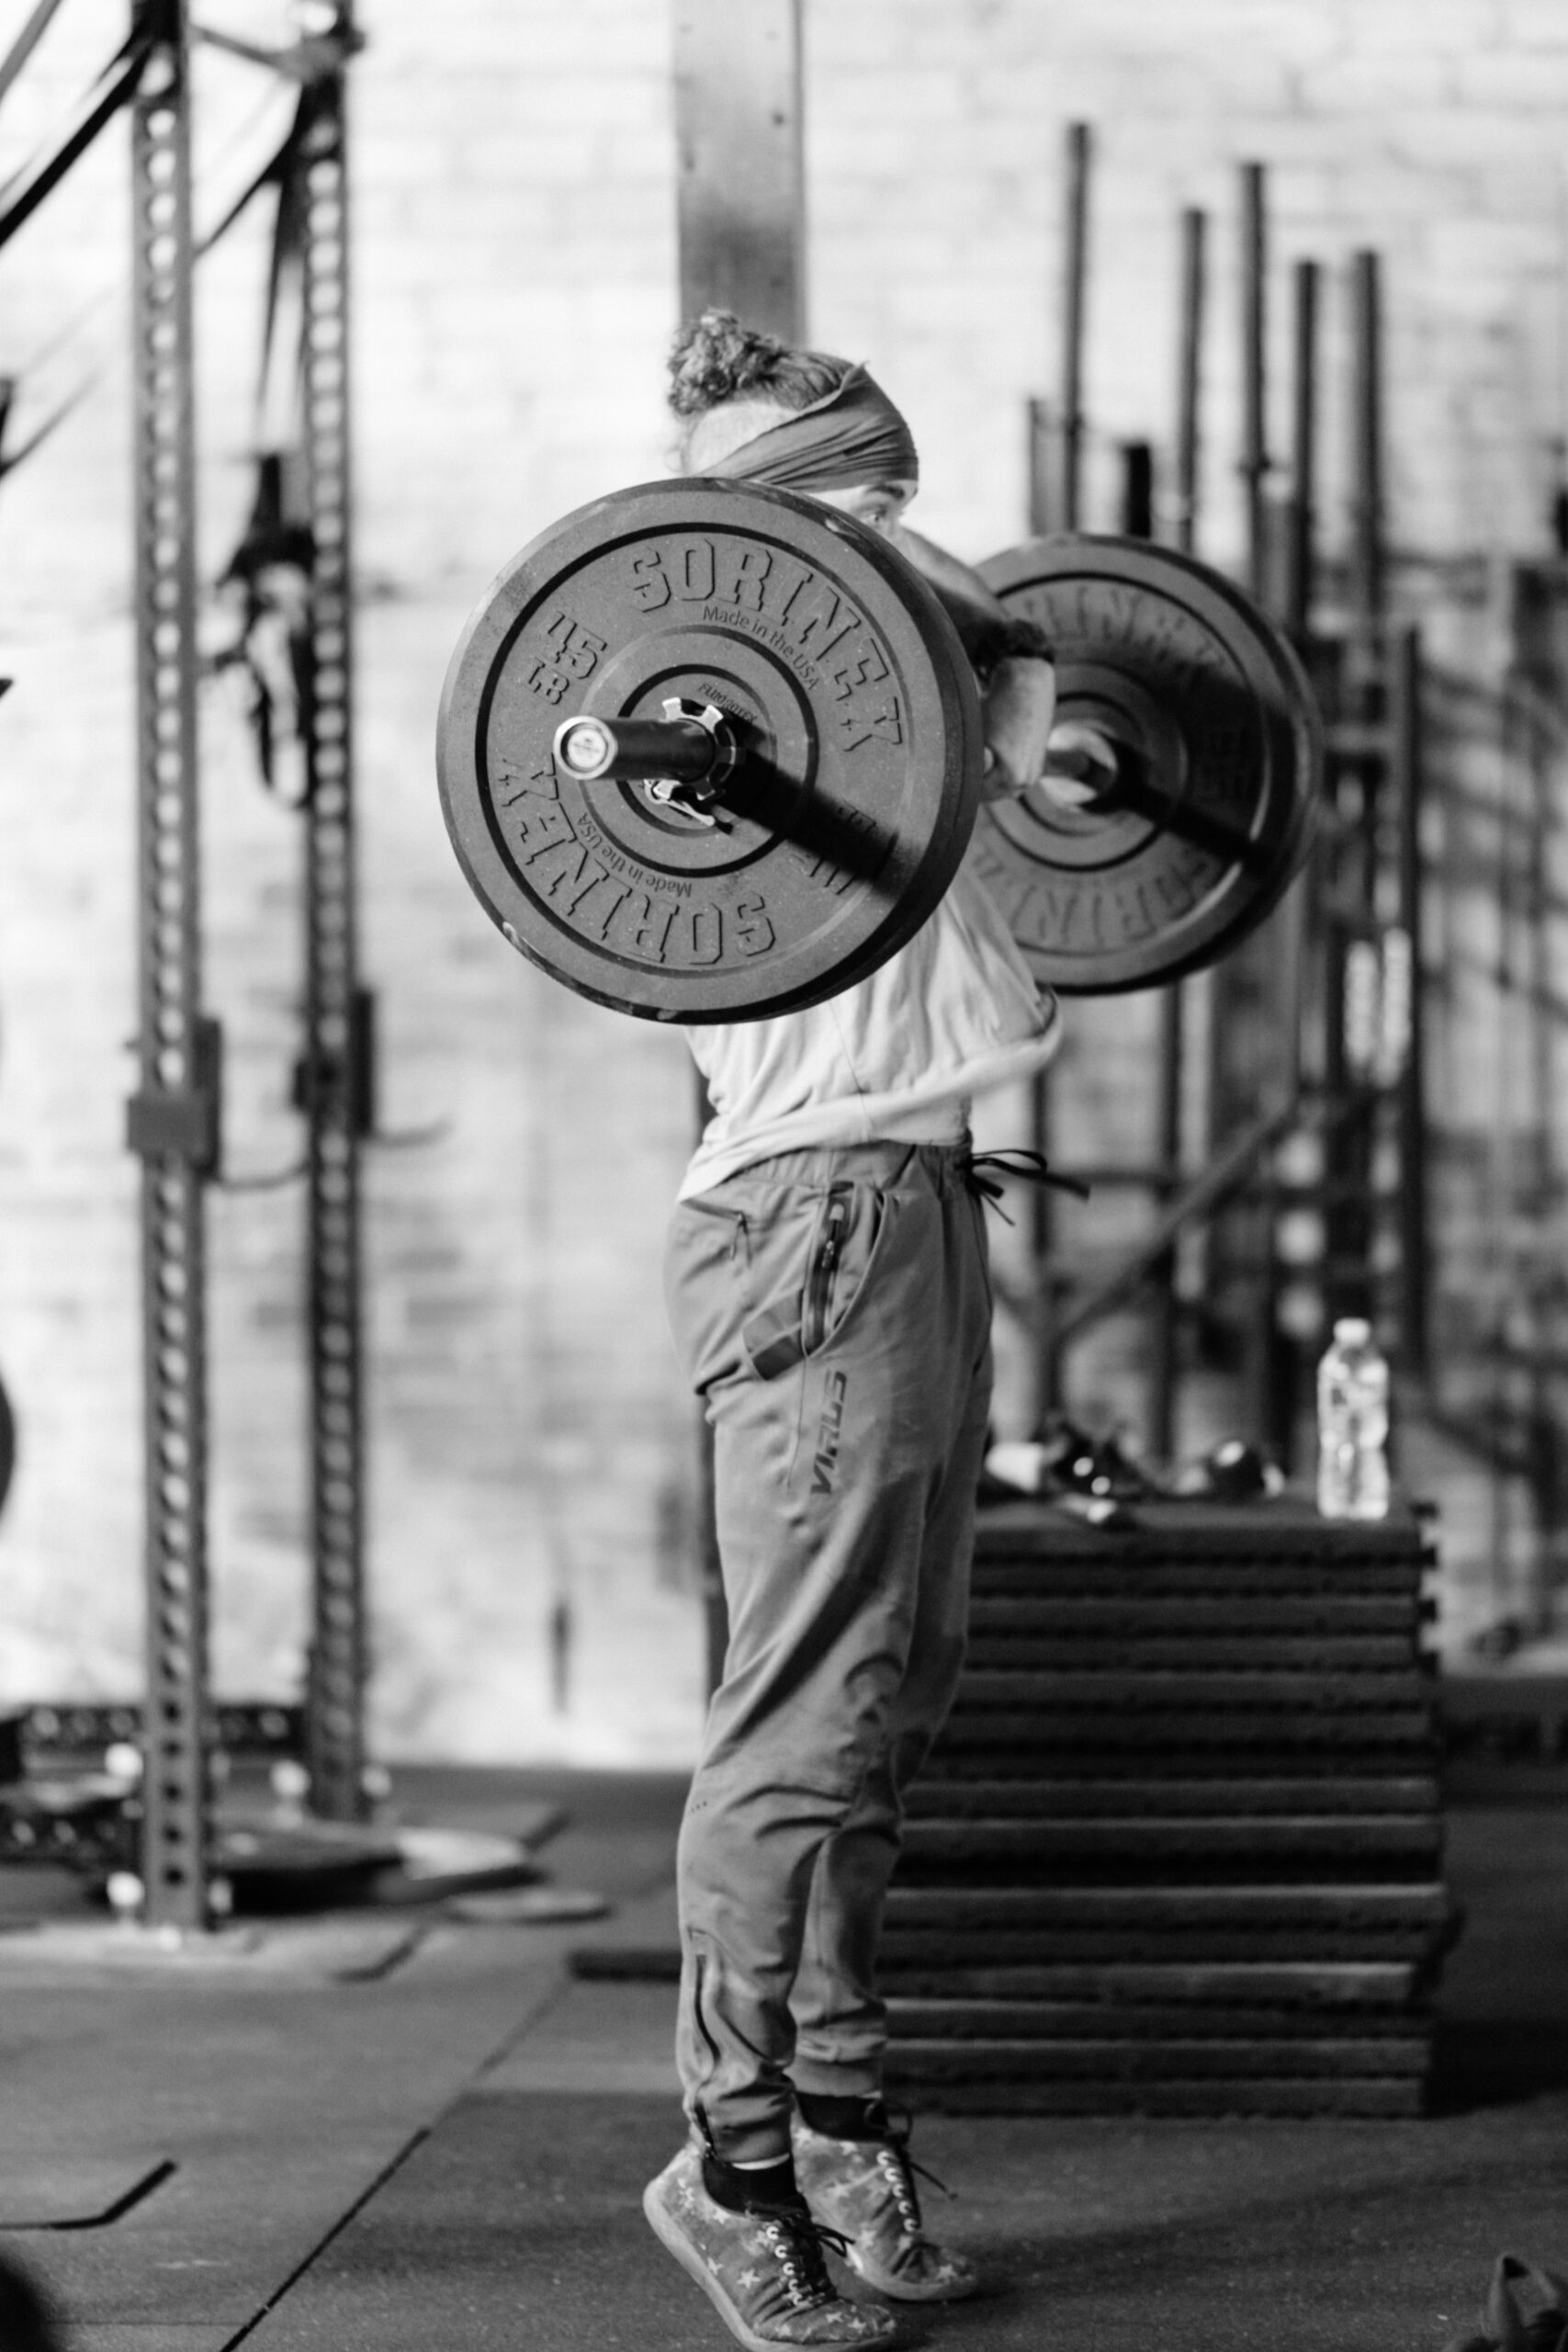 A person lifting a barbell